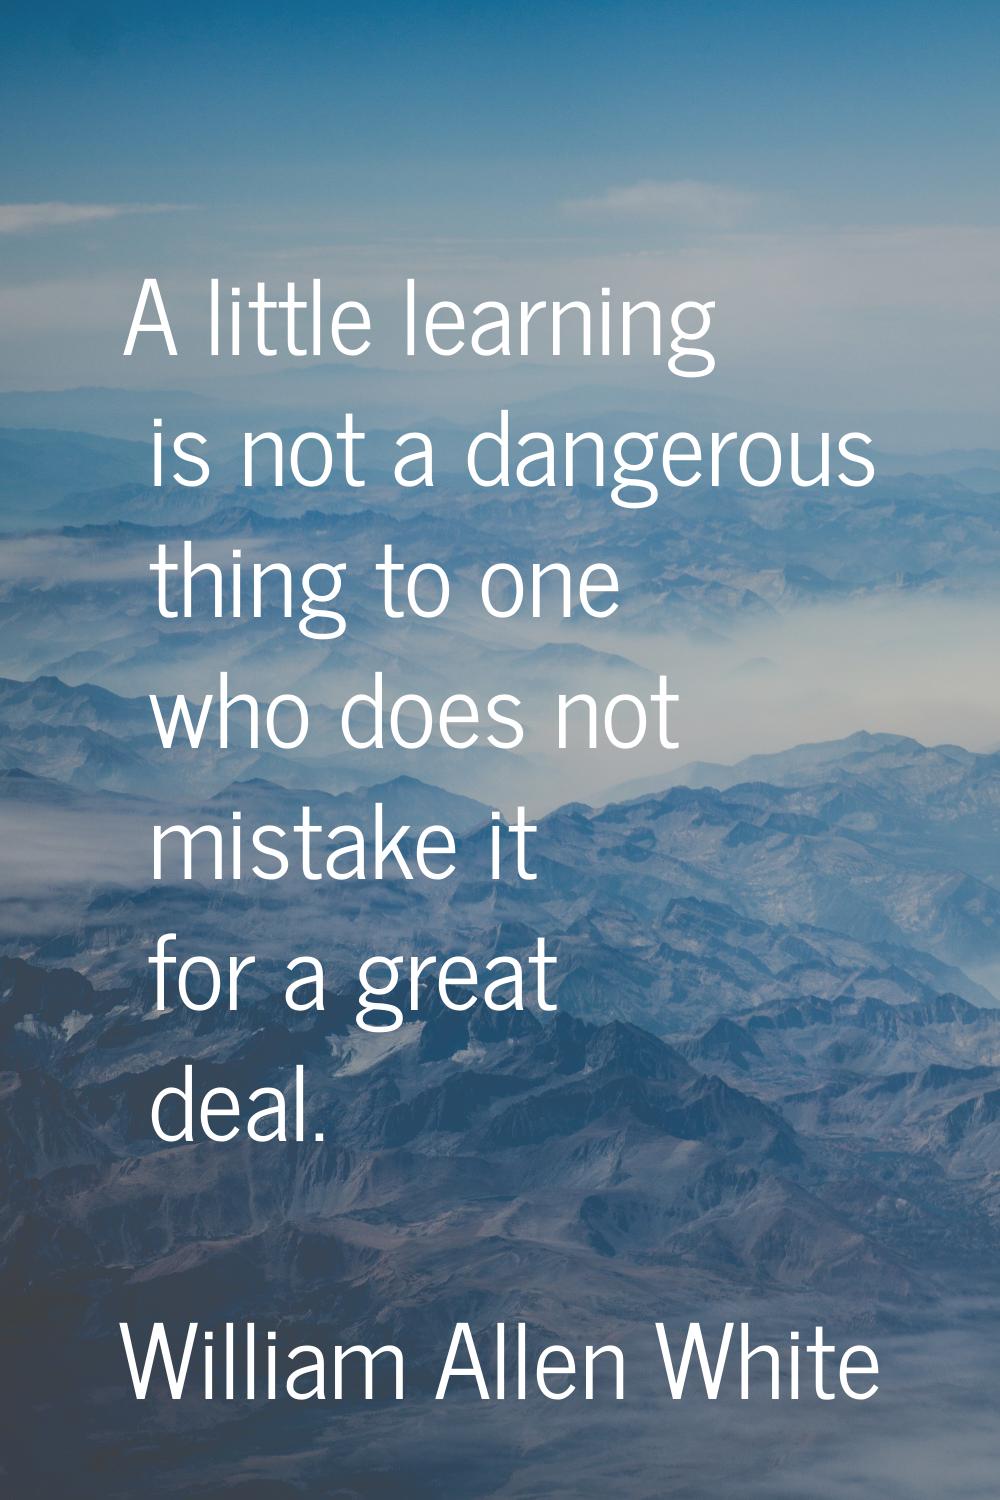 A little learning is not a dangerous thing to one who does not mistake it for a great deal.